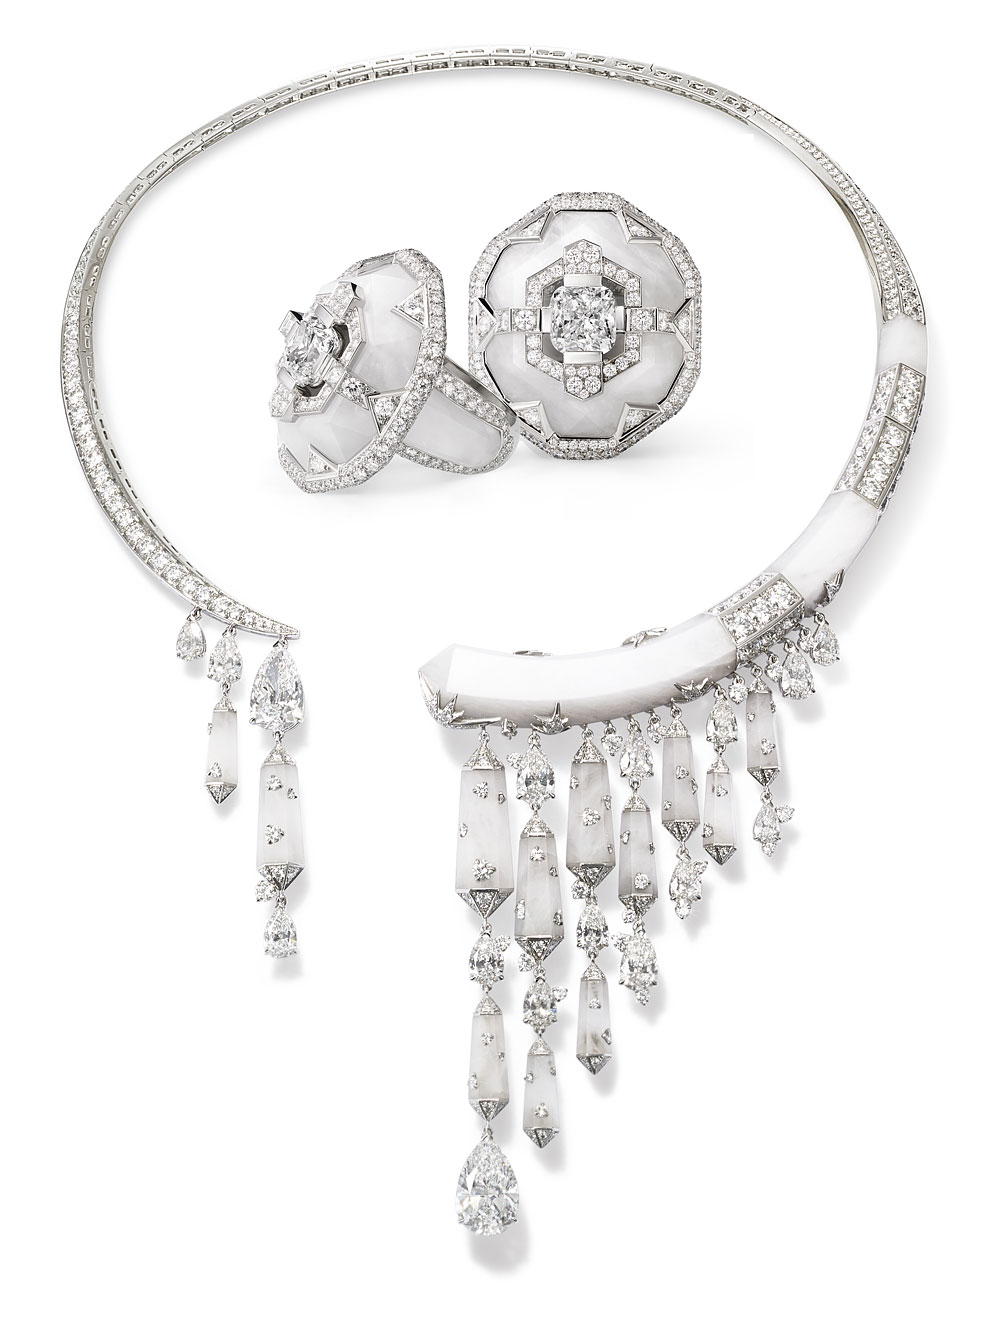 Chaumet Lumieres d’Eau high jewellery necklace and earrings in white gold, frosted rock crystal and diamonds